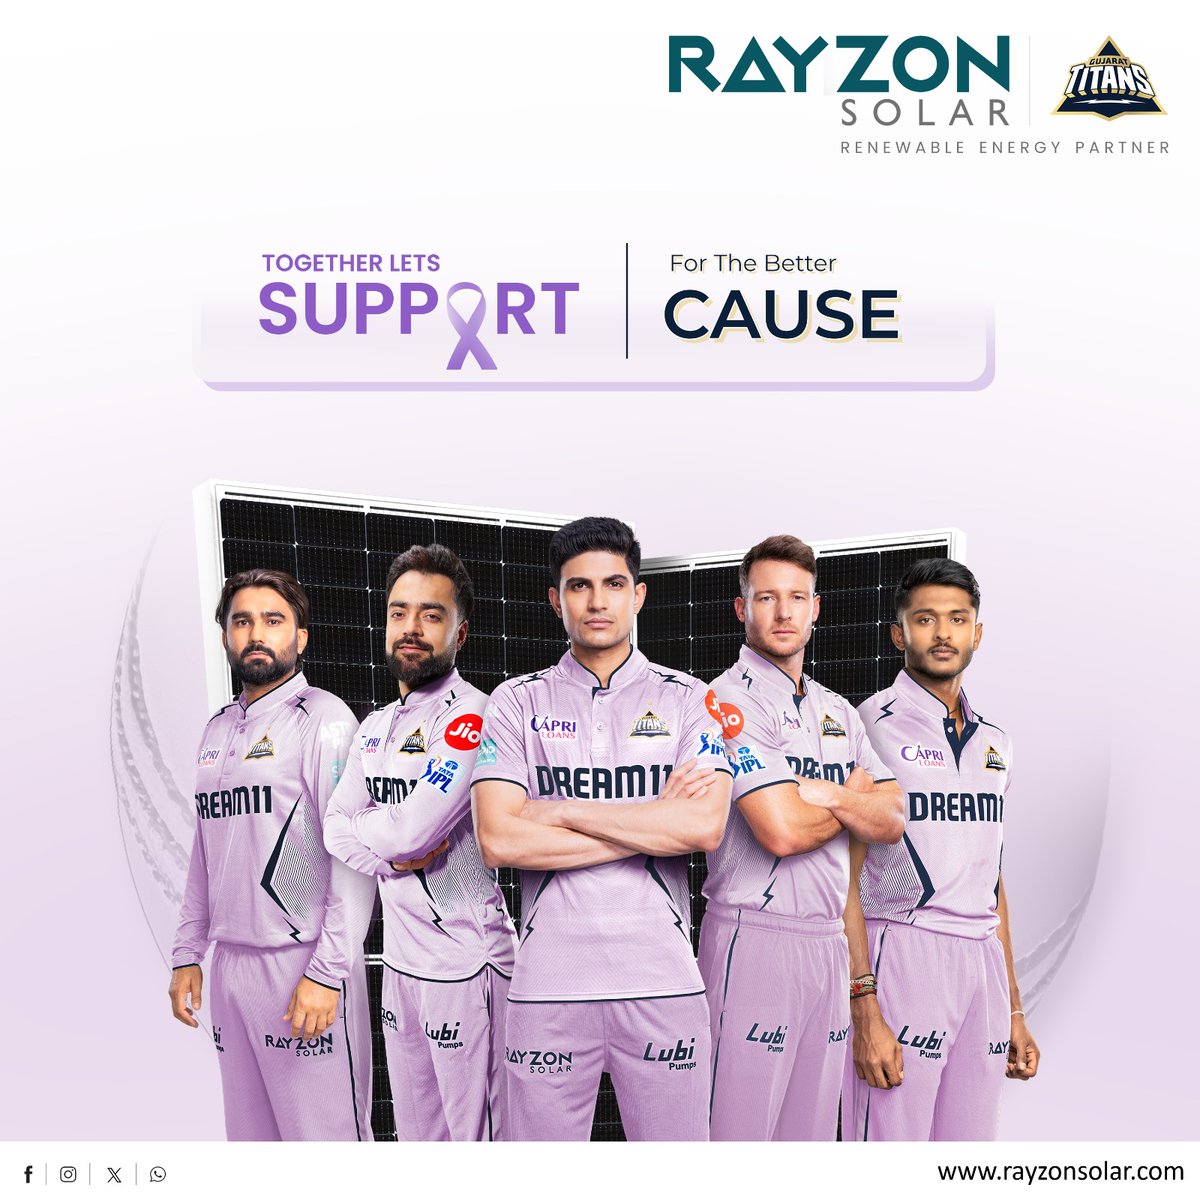 Join us in the fight against cancer! Like Gujarat Titans, Rayzon Solar is dedicated to supporting patients, survivors, and spreading awareness. Together, let's stand in solidarity, offering support and encouragement every step of the way.

#CancerAwareness #SupportTogether 🎗️